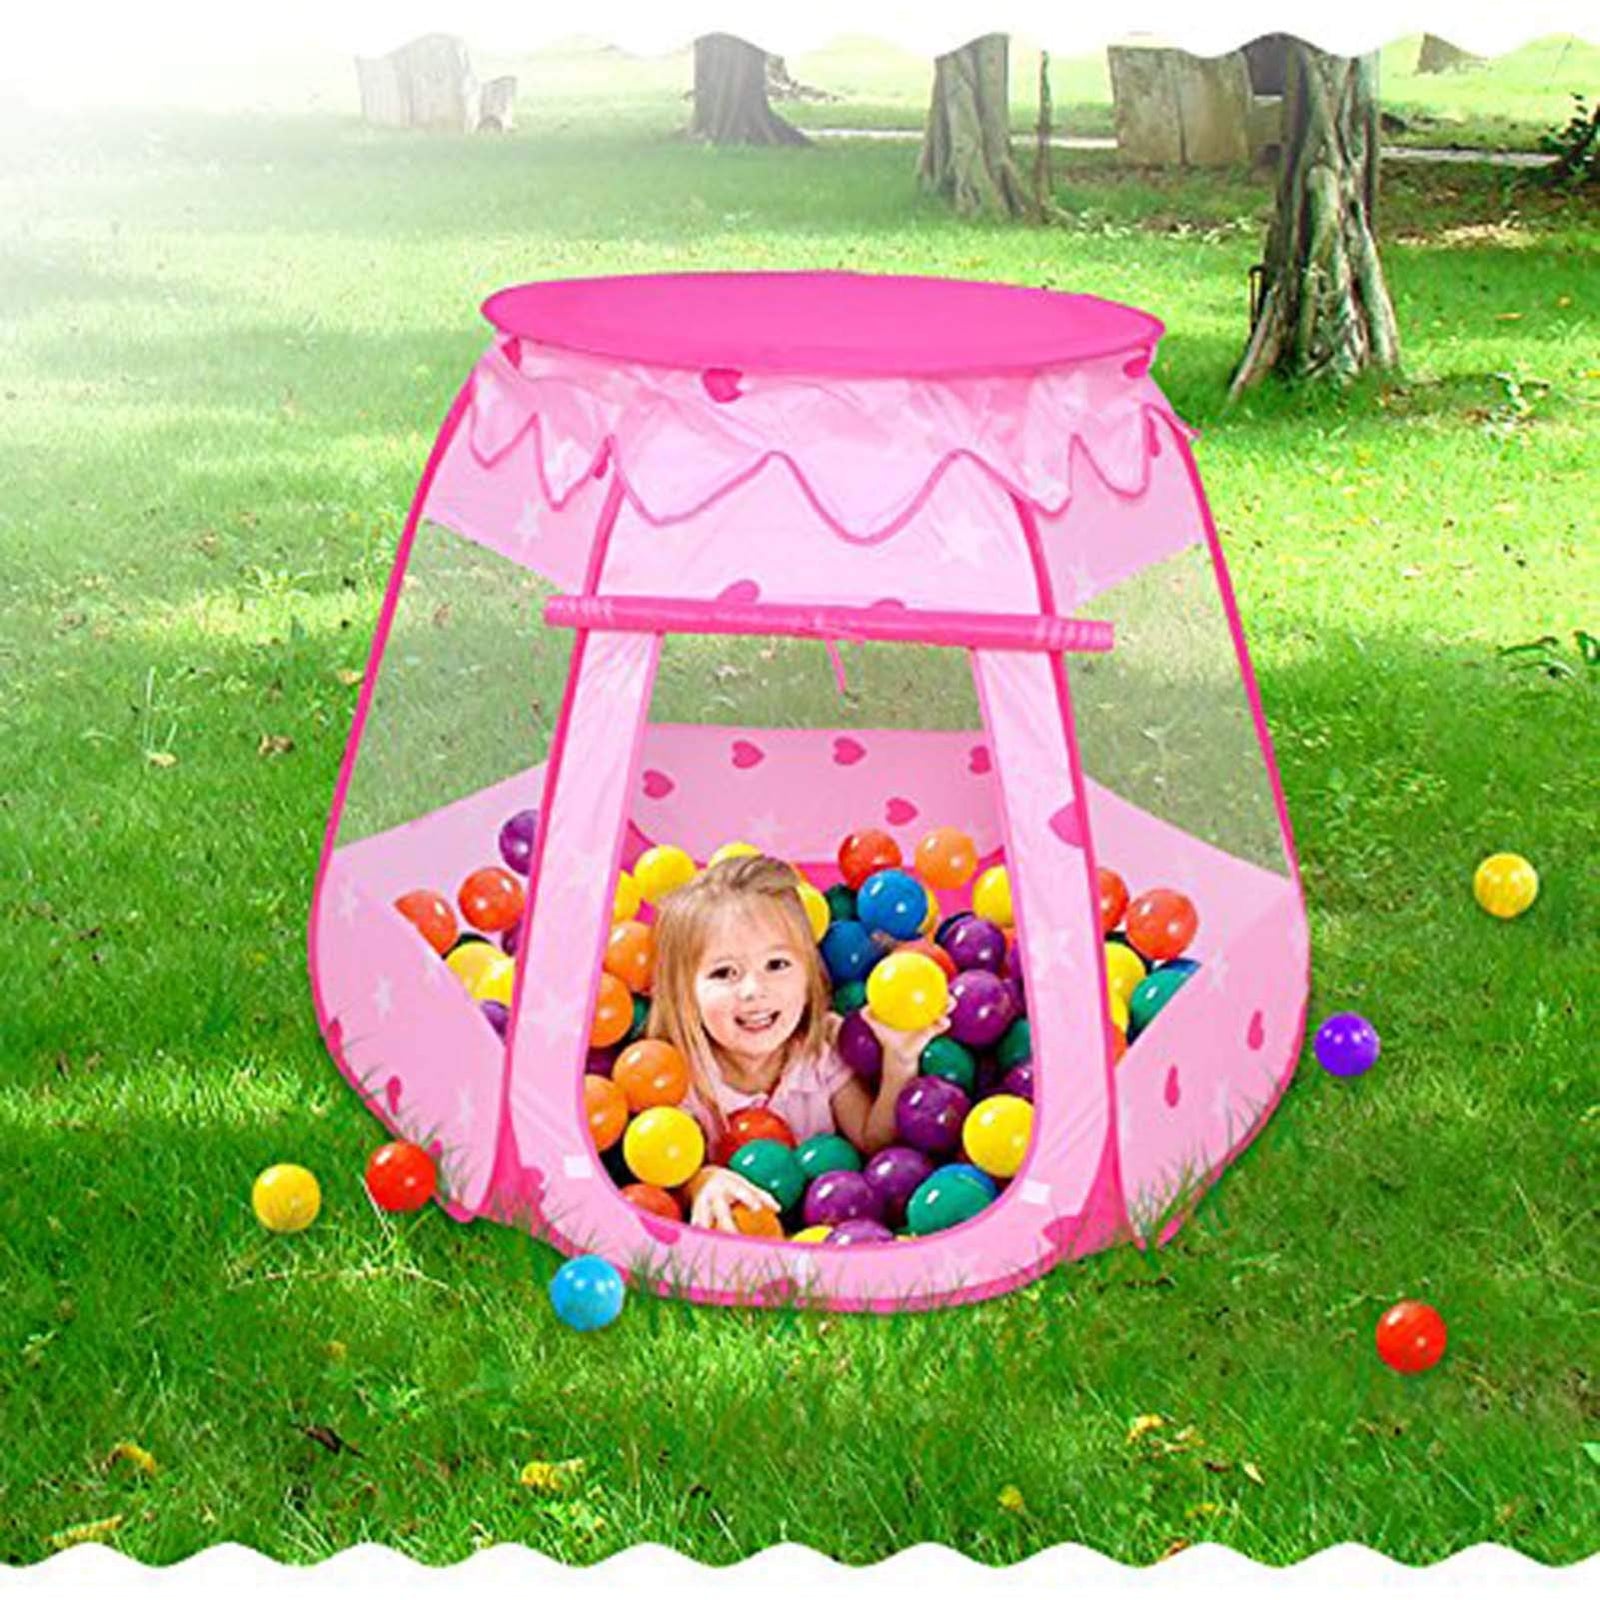 Crayline Pop Up Princess Tent with Star Light, Toys for 1 Year Old Girl Birthday Gift, Ball Pit for Toddlers Girls Toys, Easy to Pop Up and Assemble